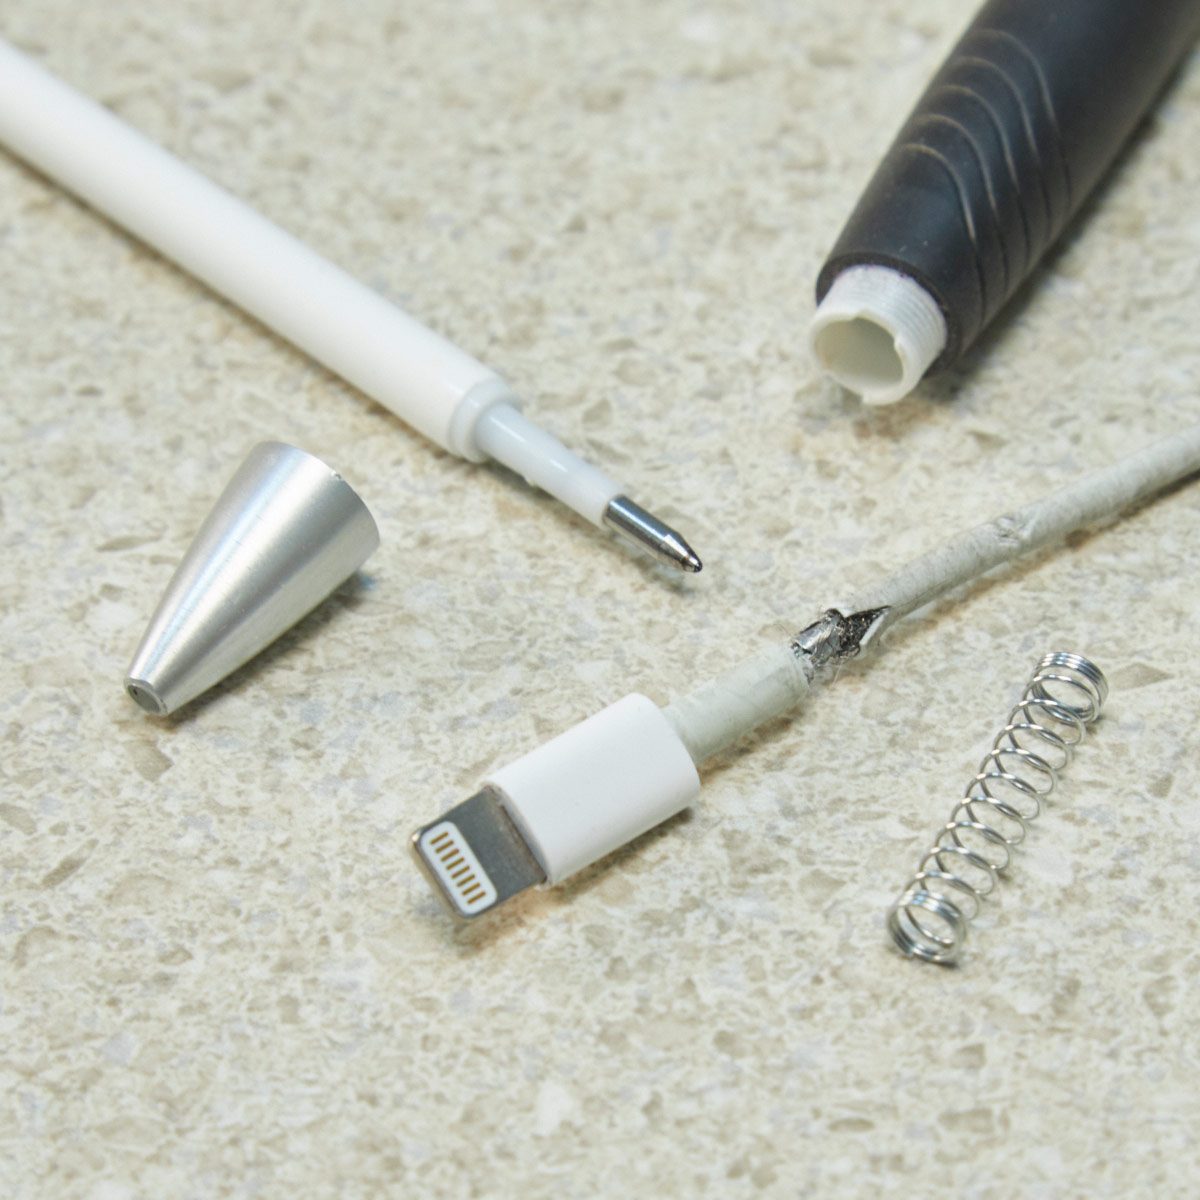 How to Extend the Life of Your Phone Charger